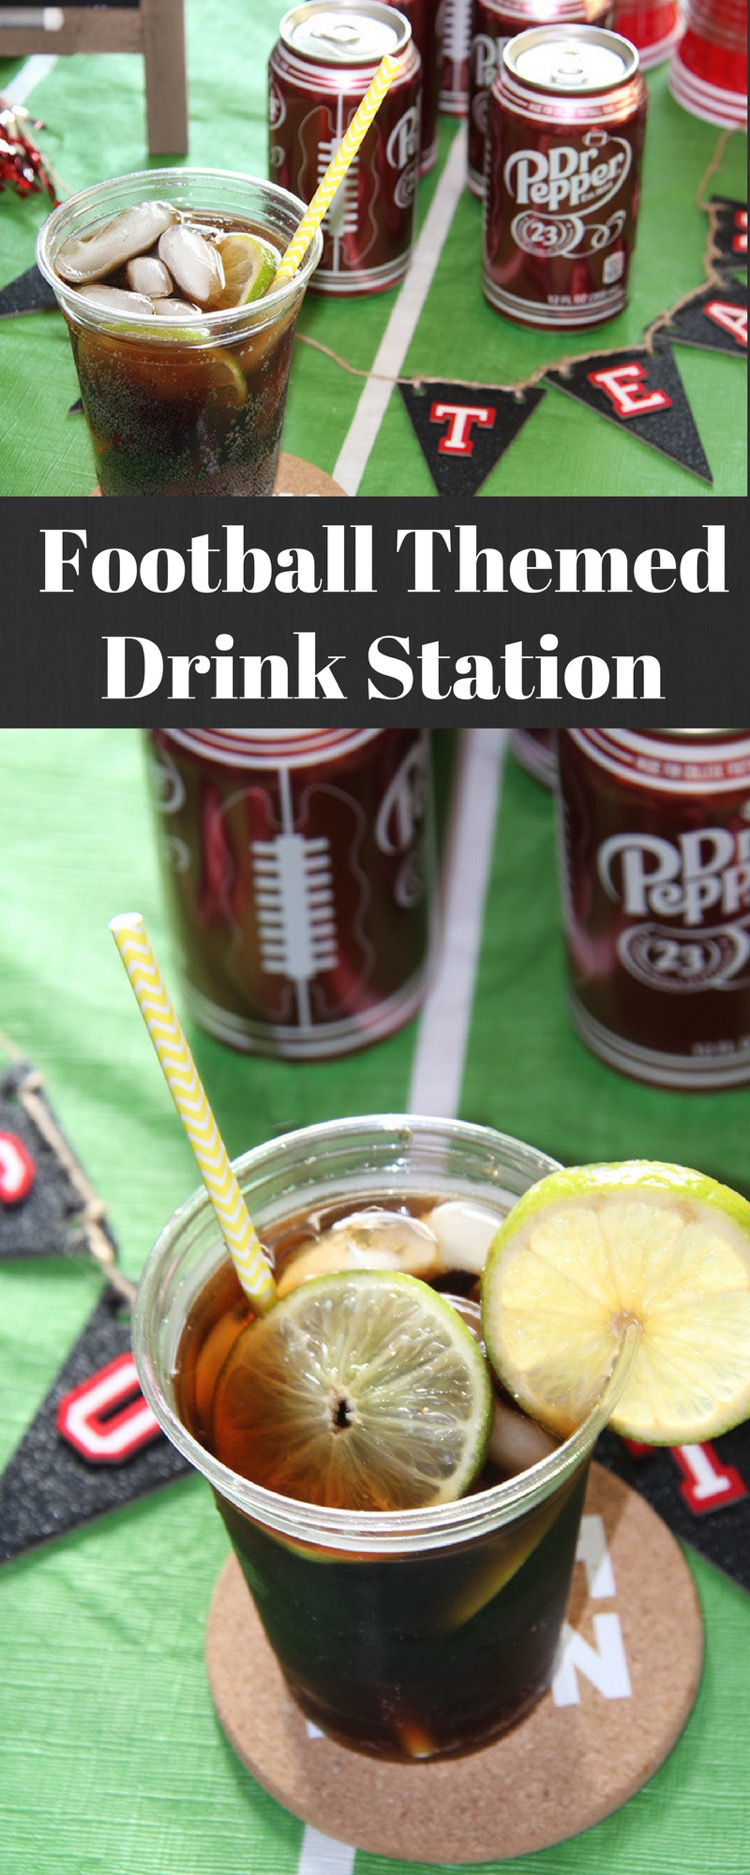 Football Themed Drink Station